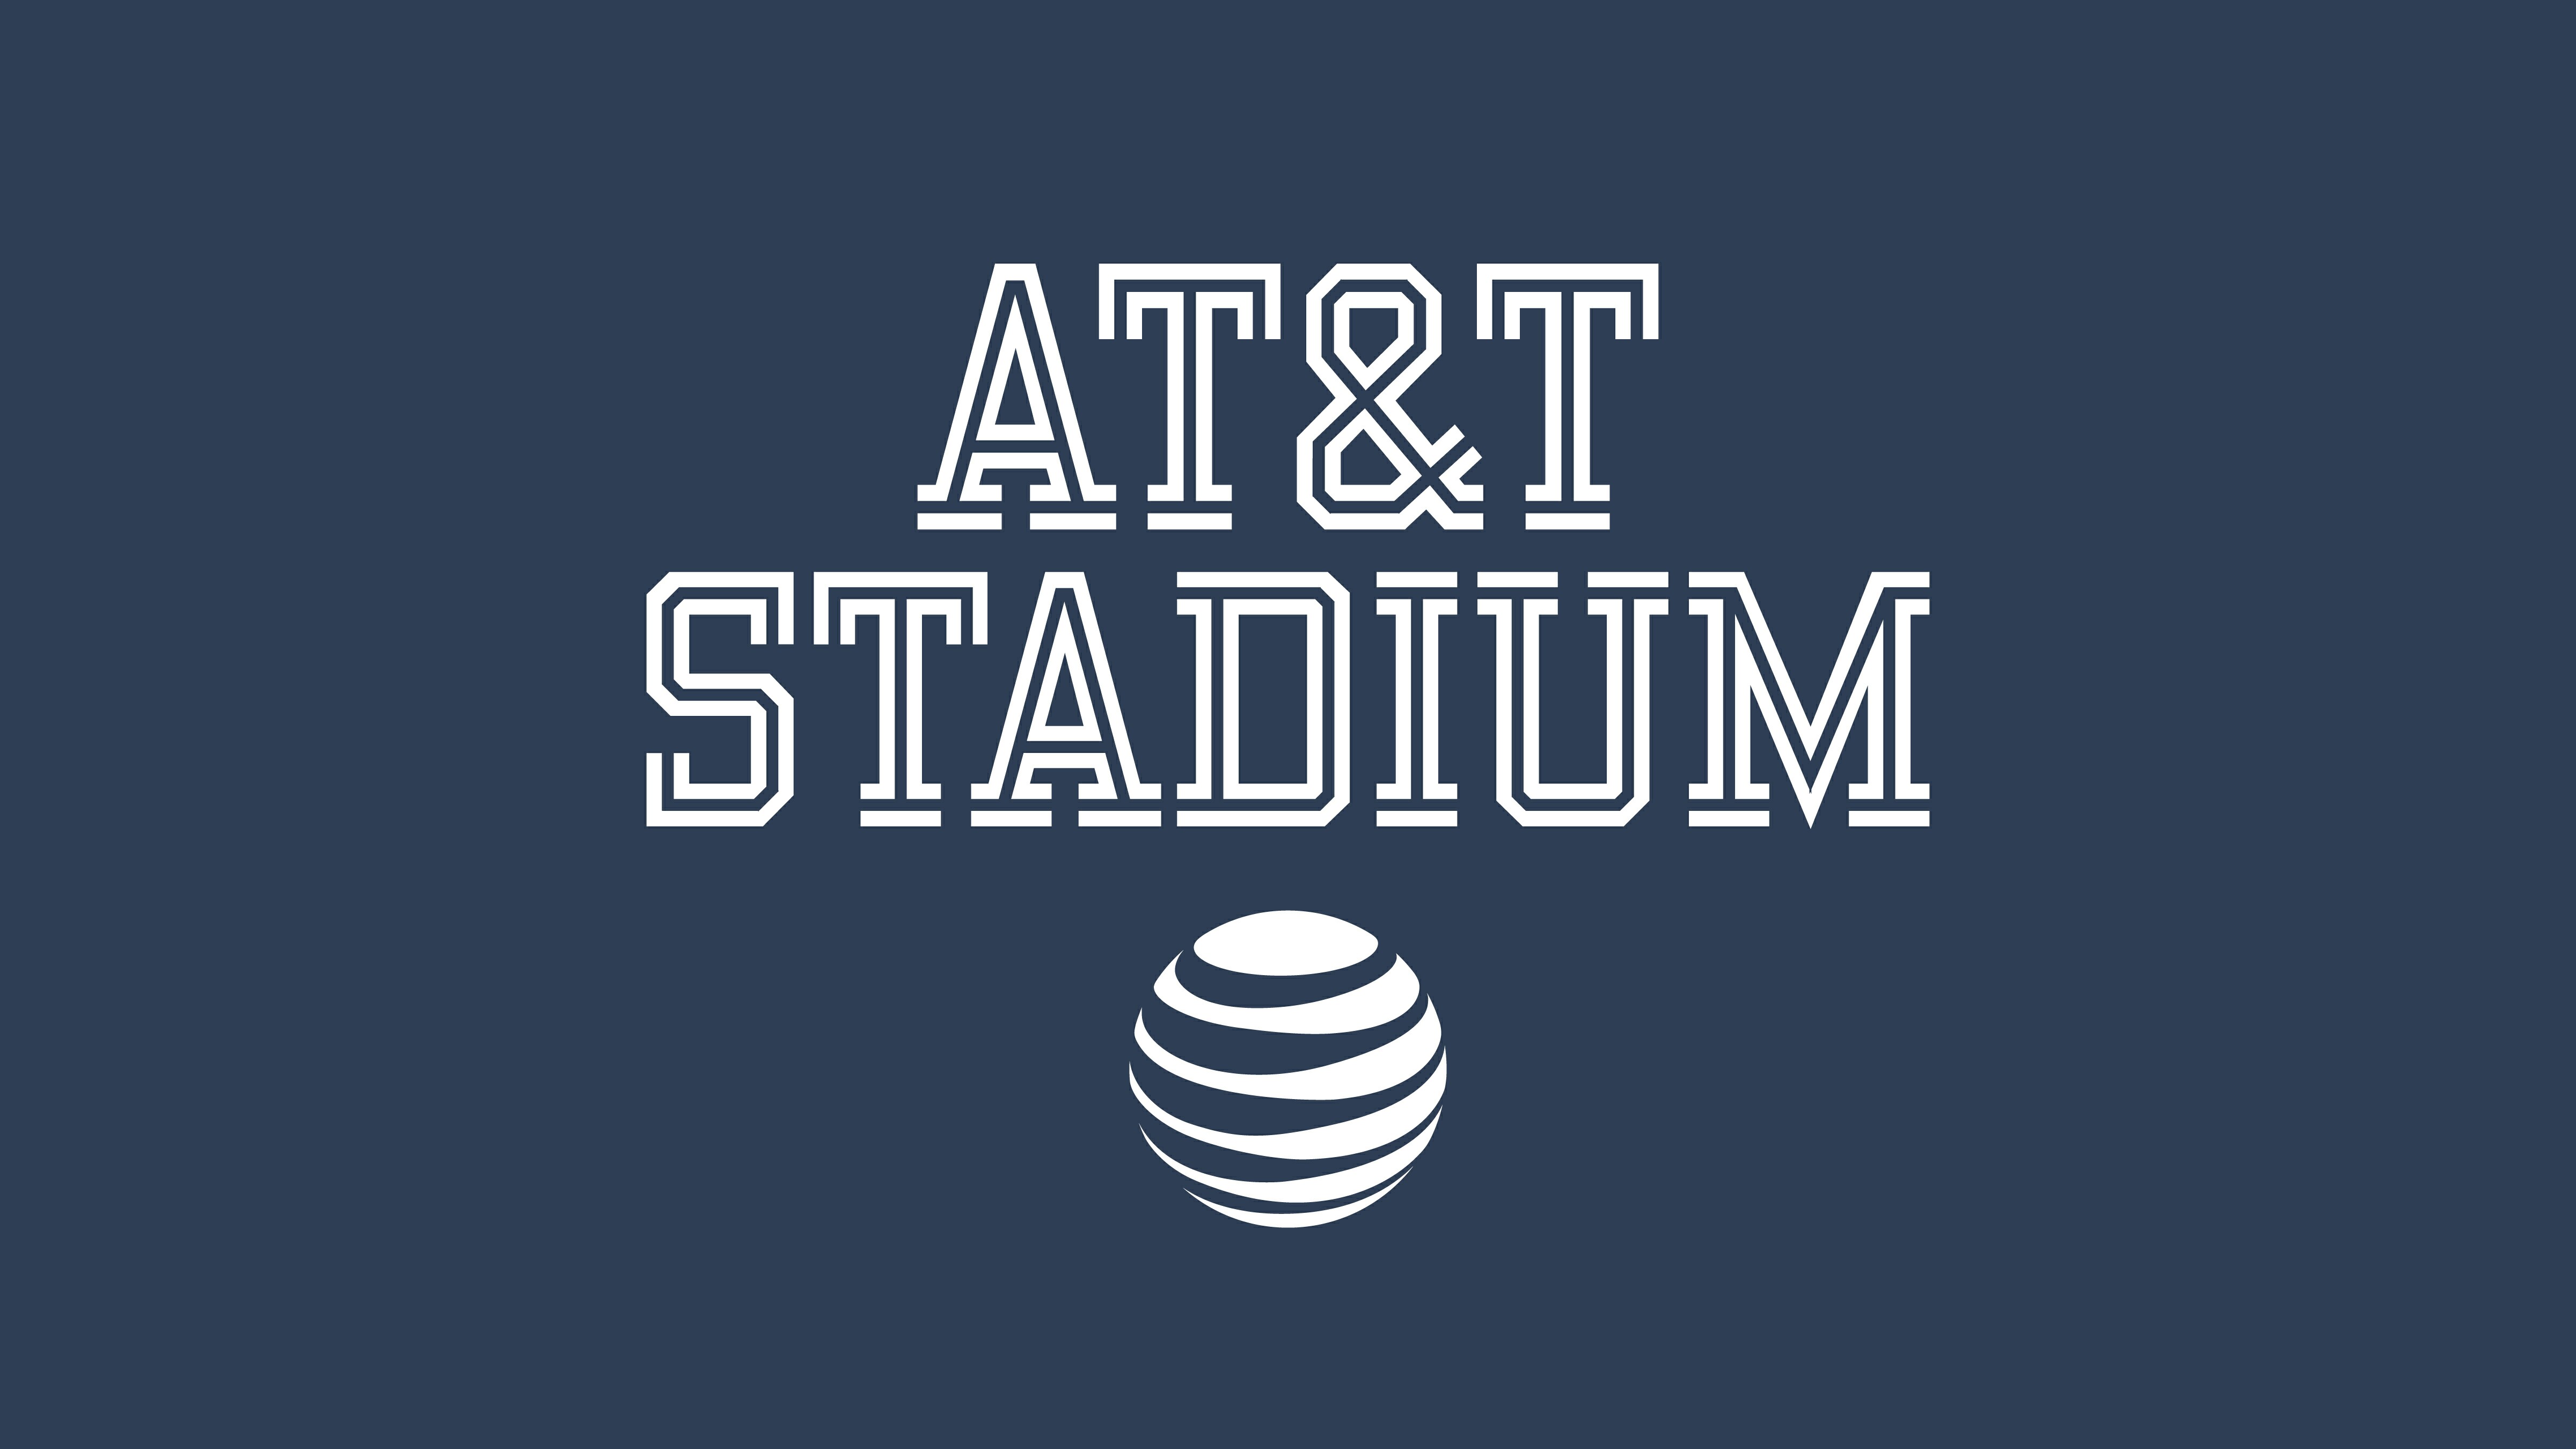 Download Dallas Cowboys and ATT Expand Relationship to Create New